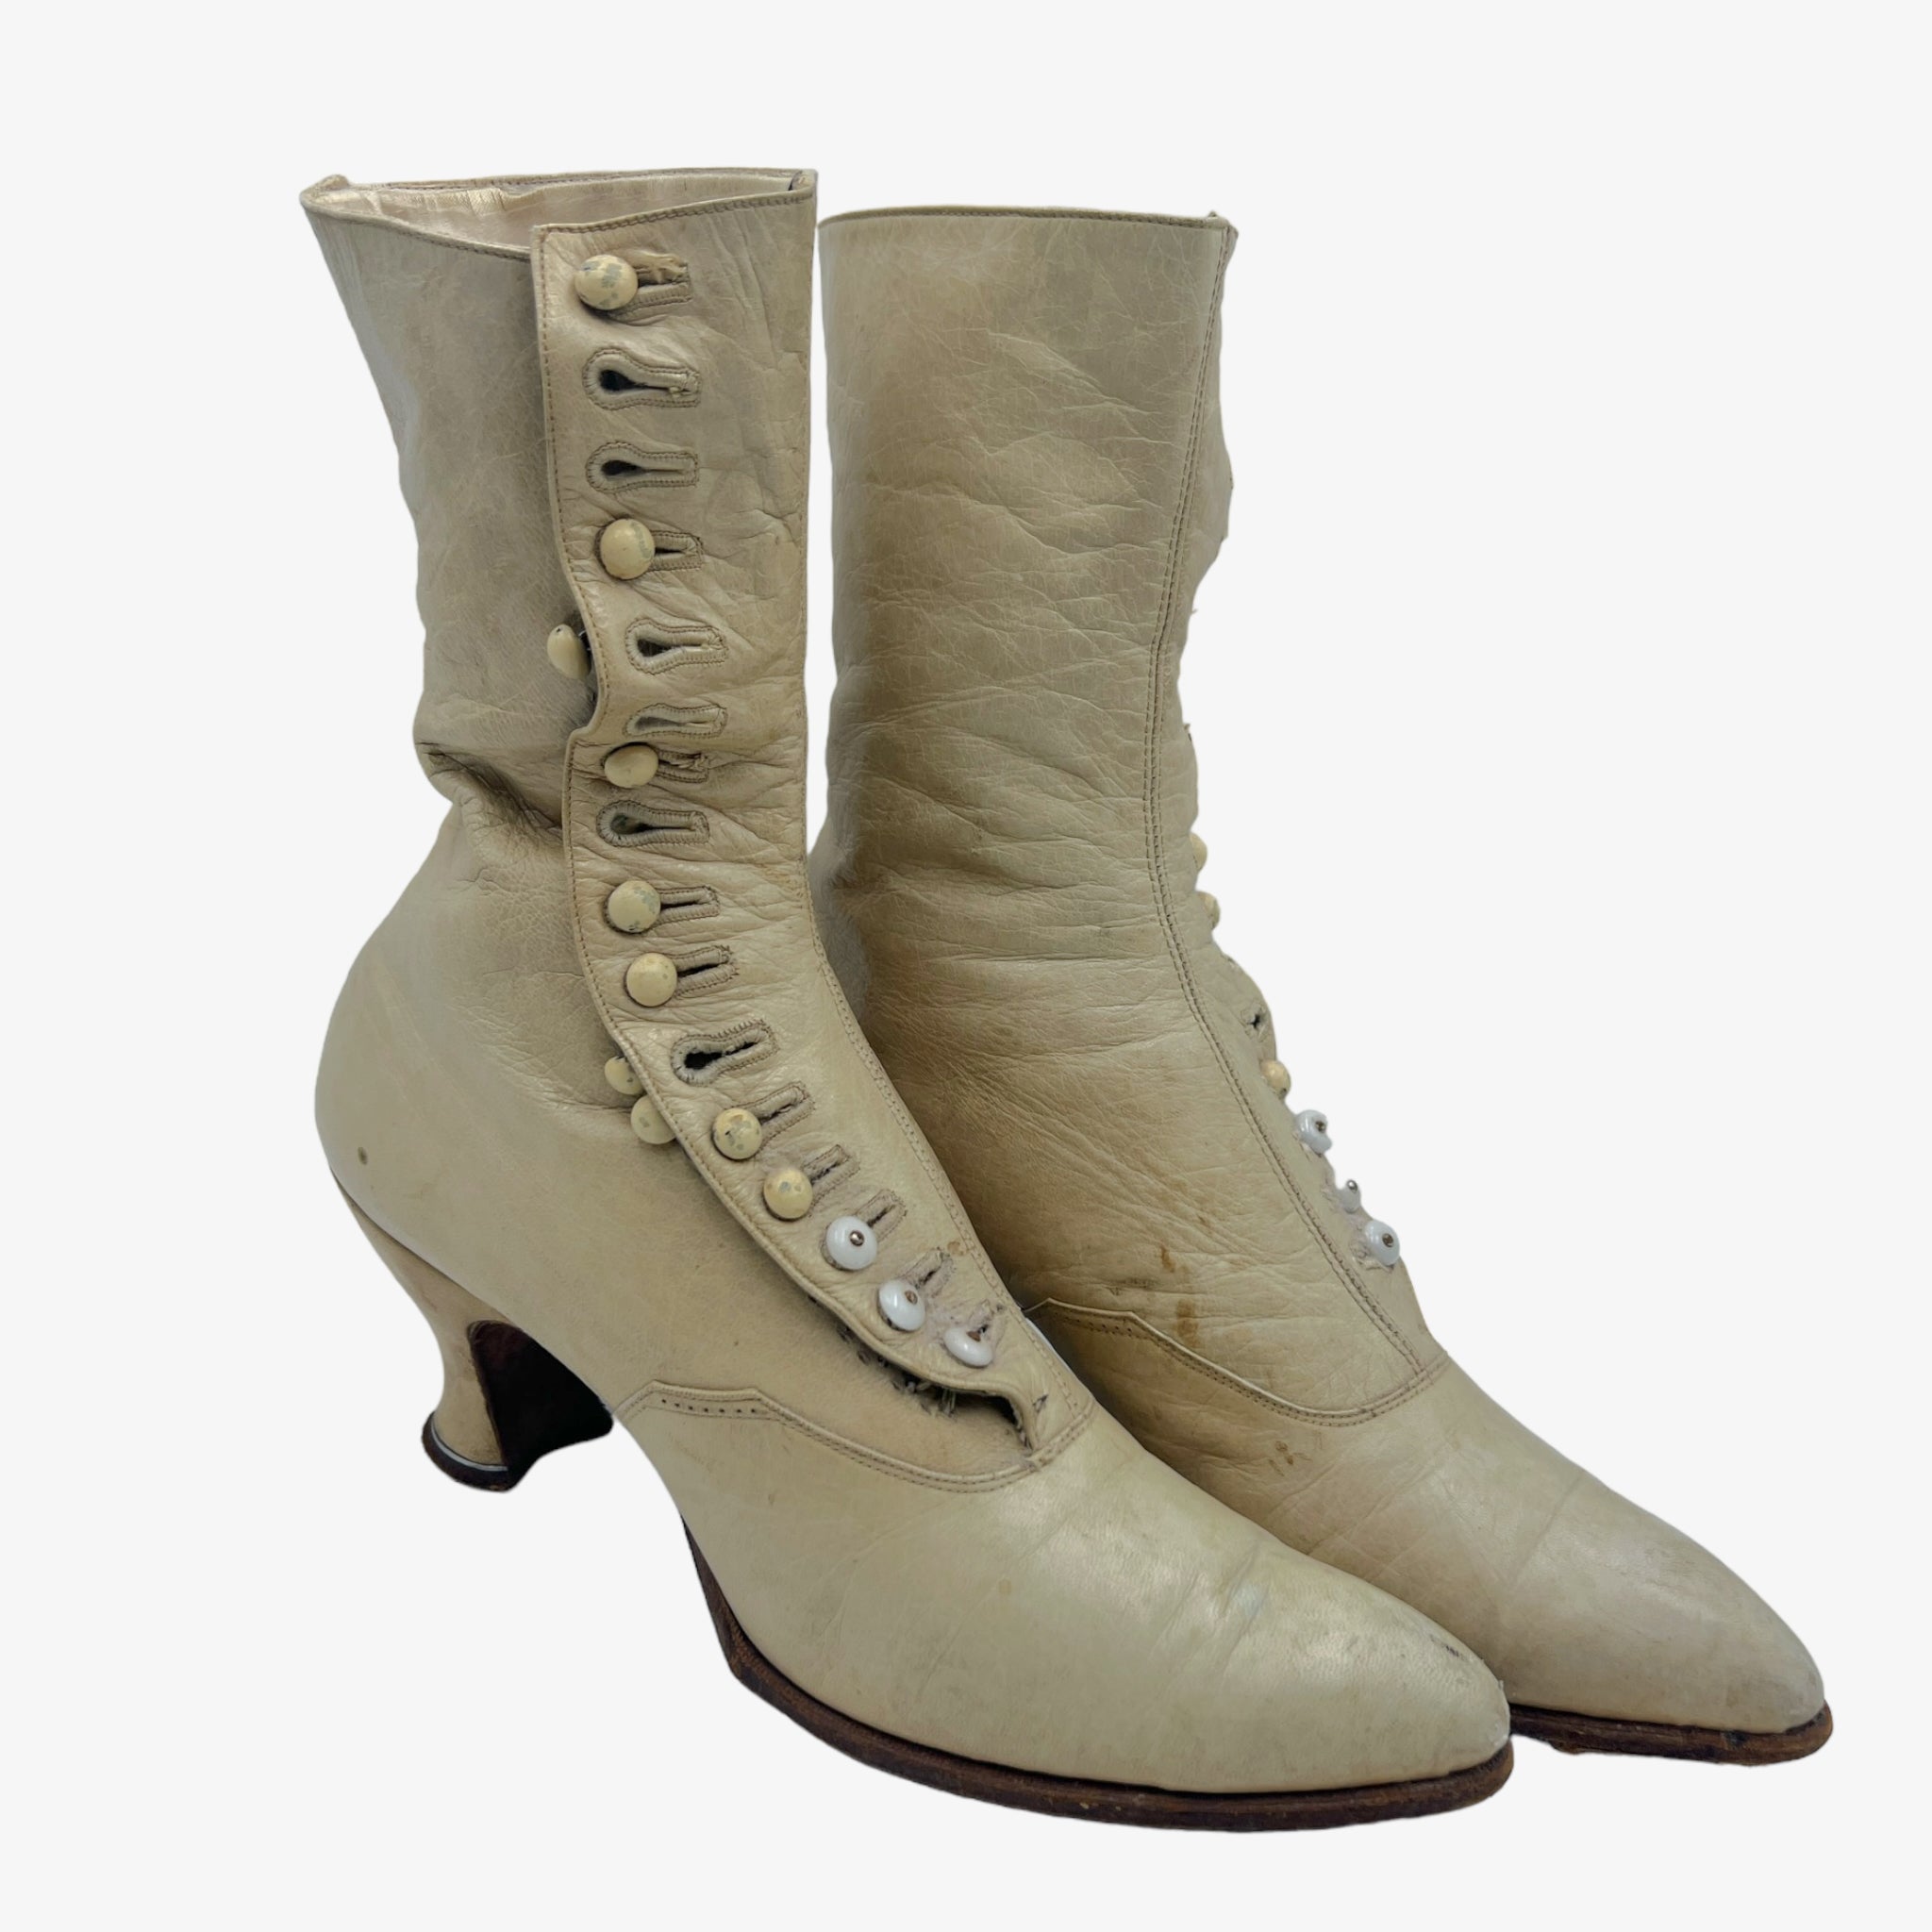 Antique Victorian Button-Up Leather Boots